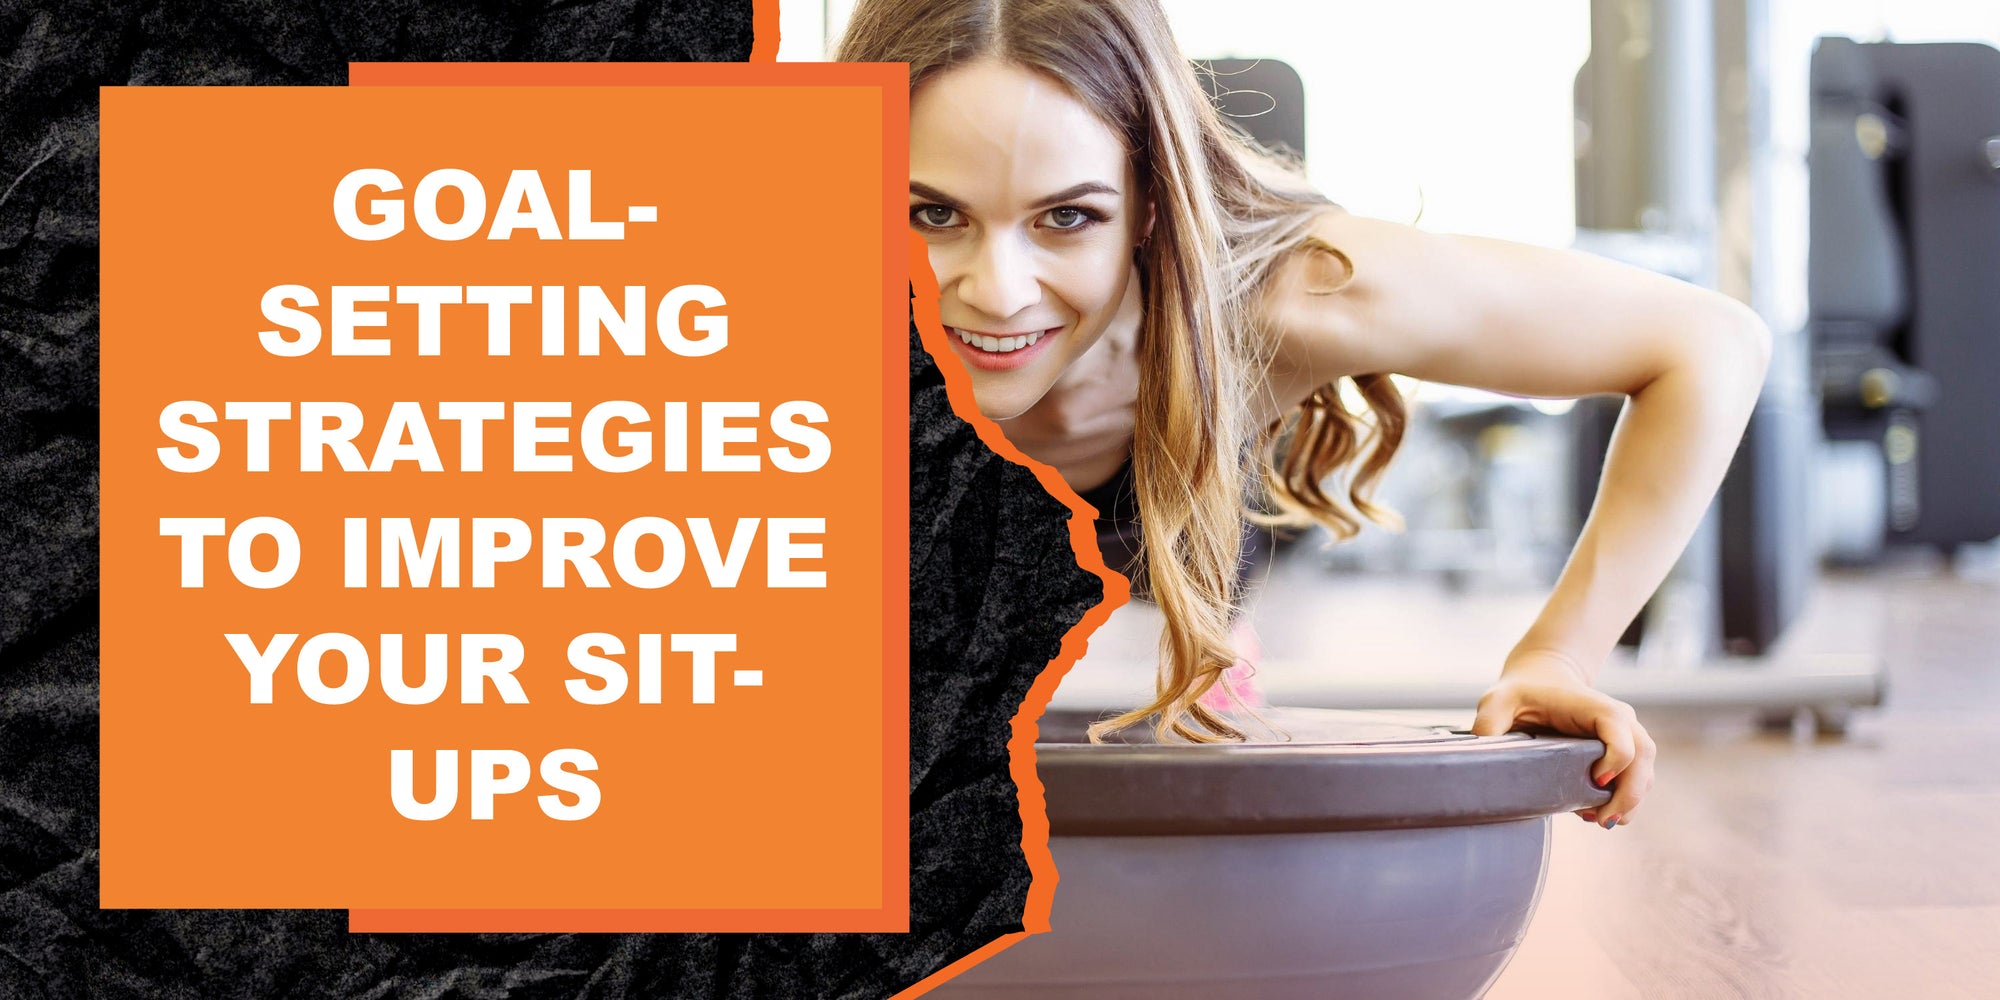 Using Goal-Setting Strategies to Improve Your Sit-Up Performance